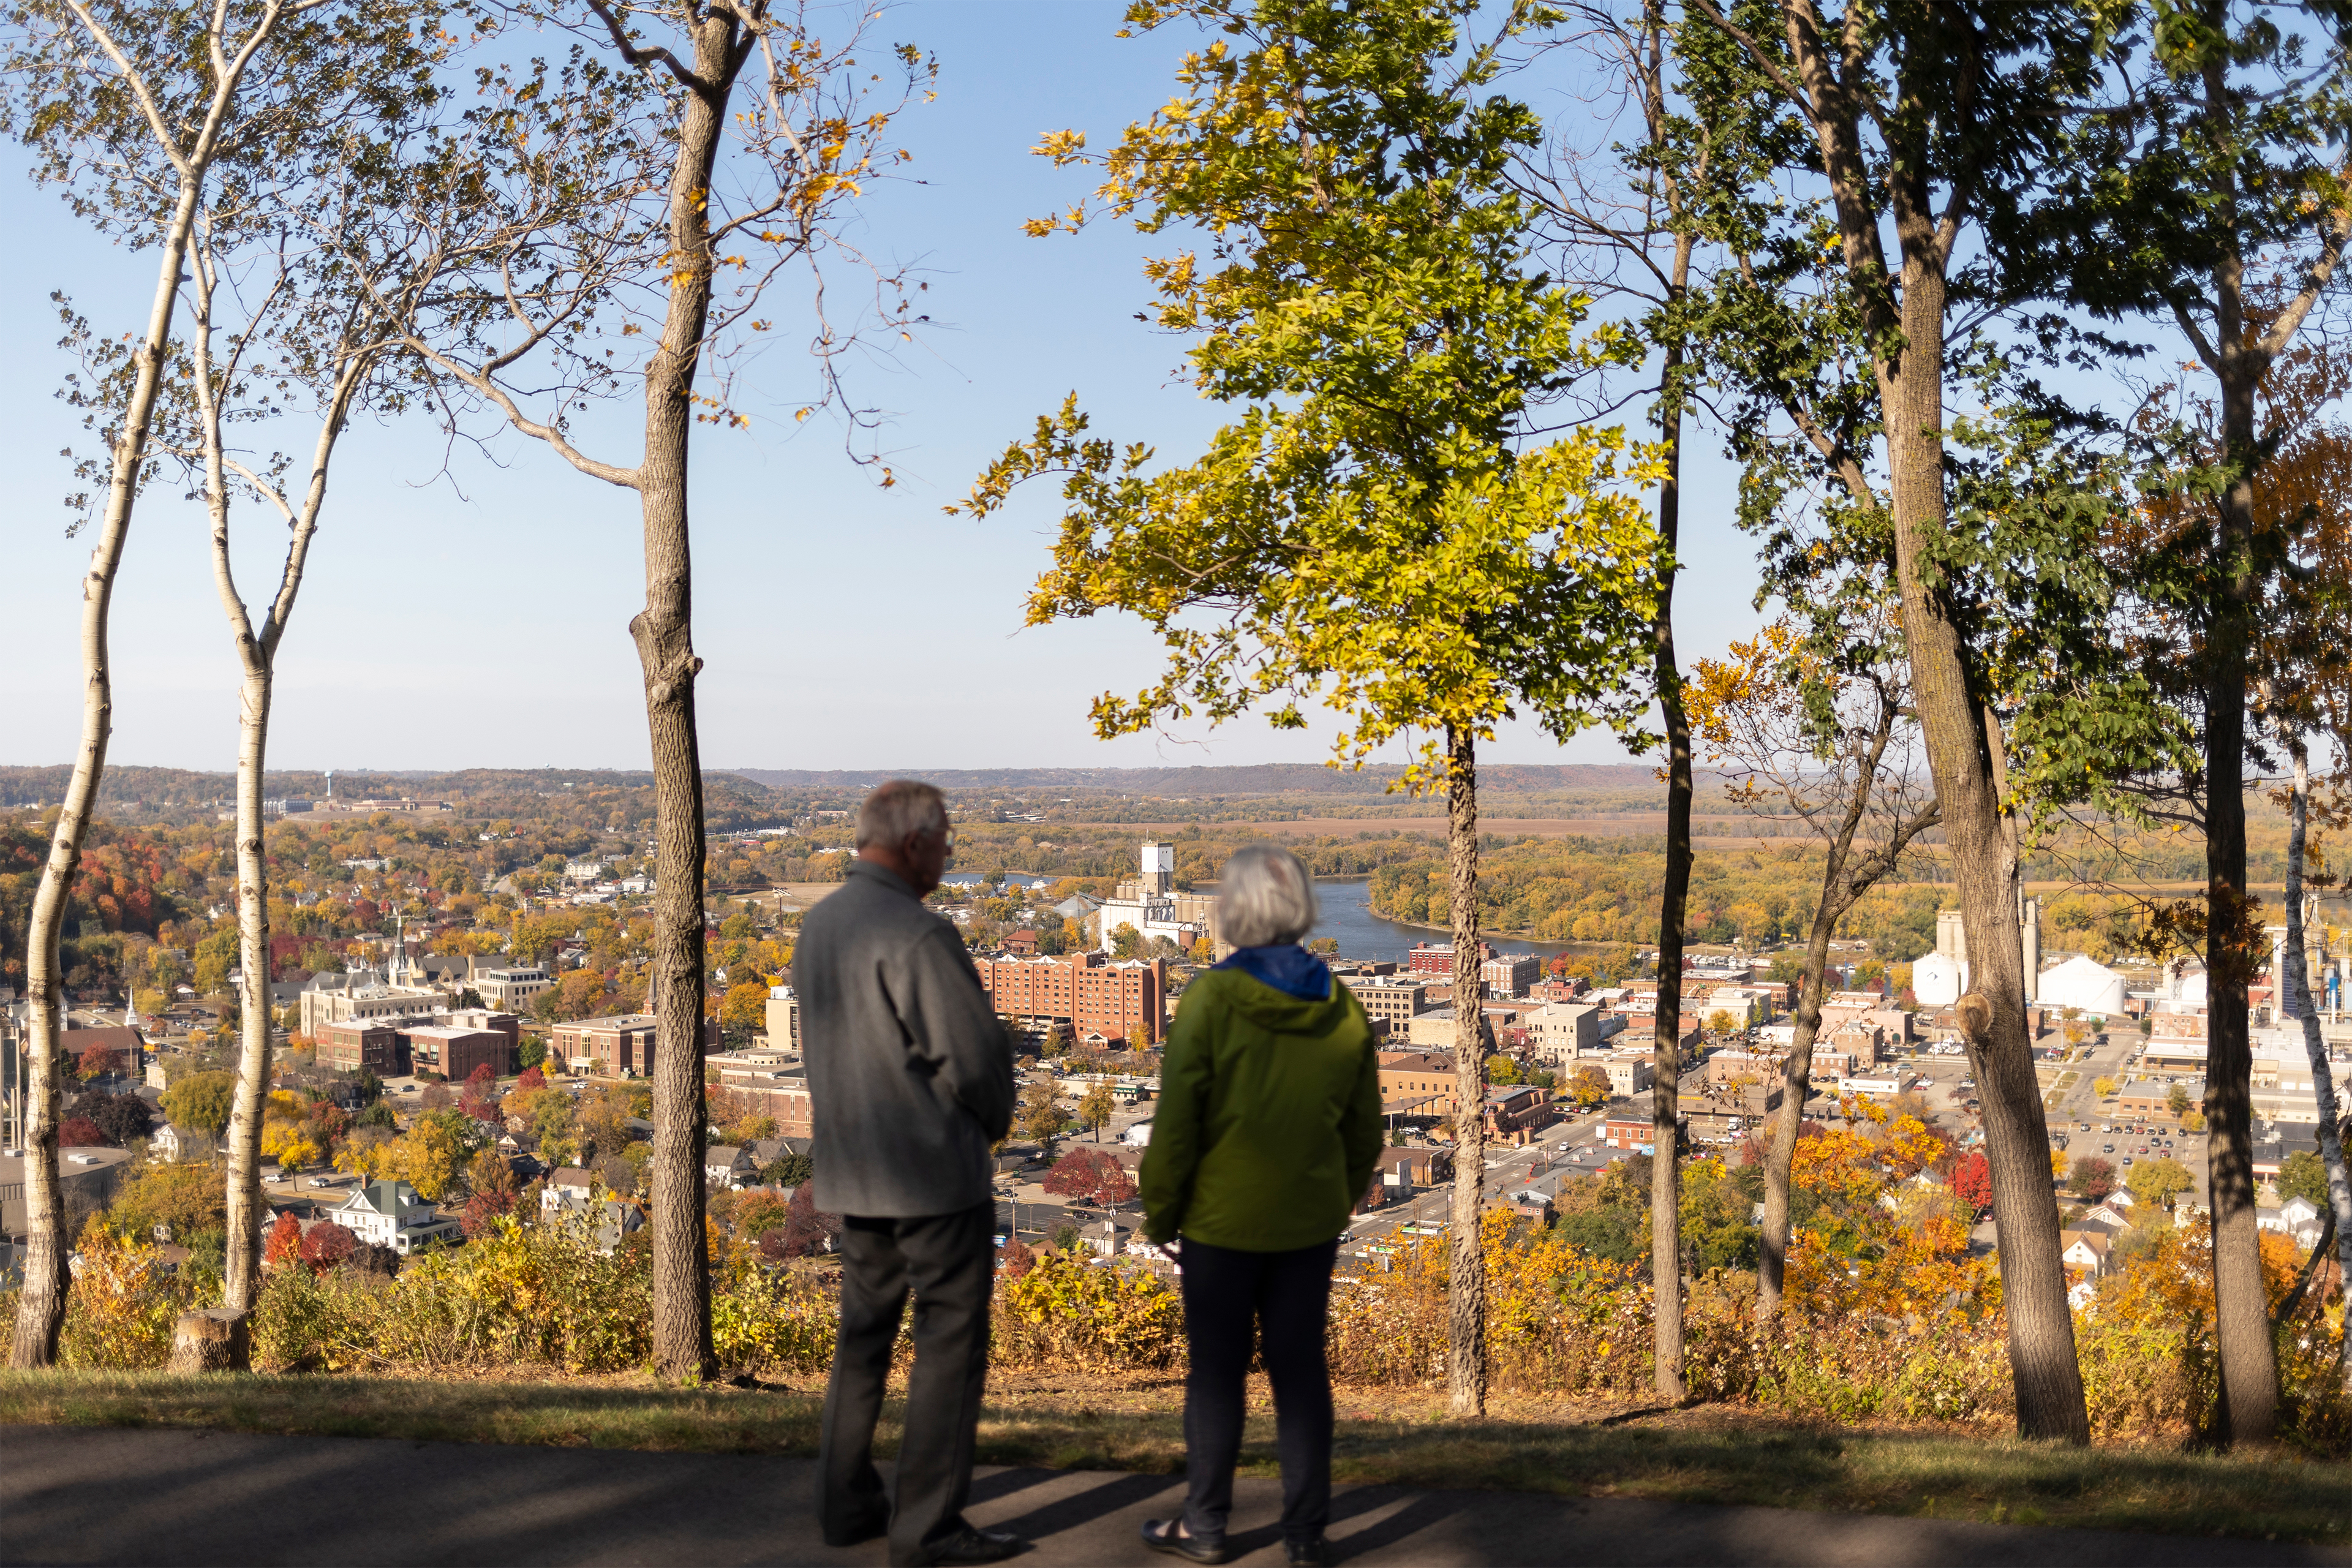 A photo shows Jim and Judie Maybach standing on a hill overlooking the city of Red Wing, Minnesota.